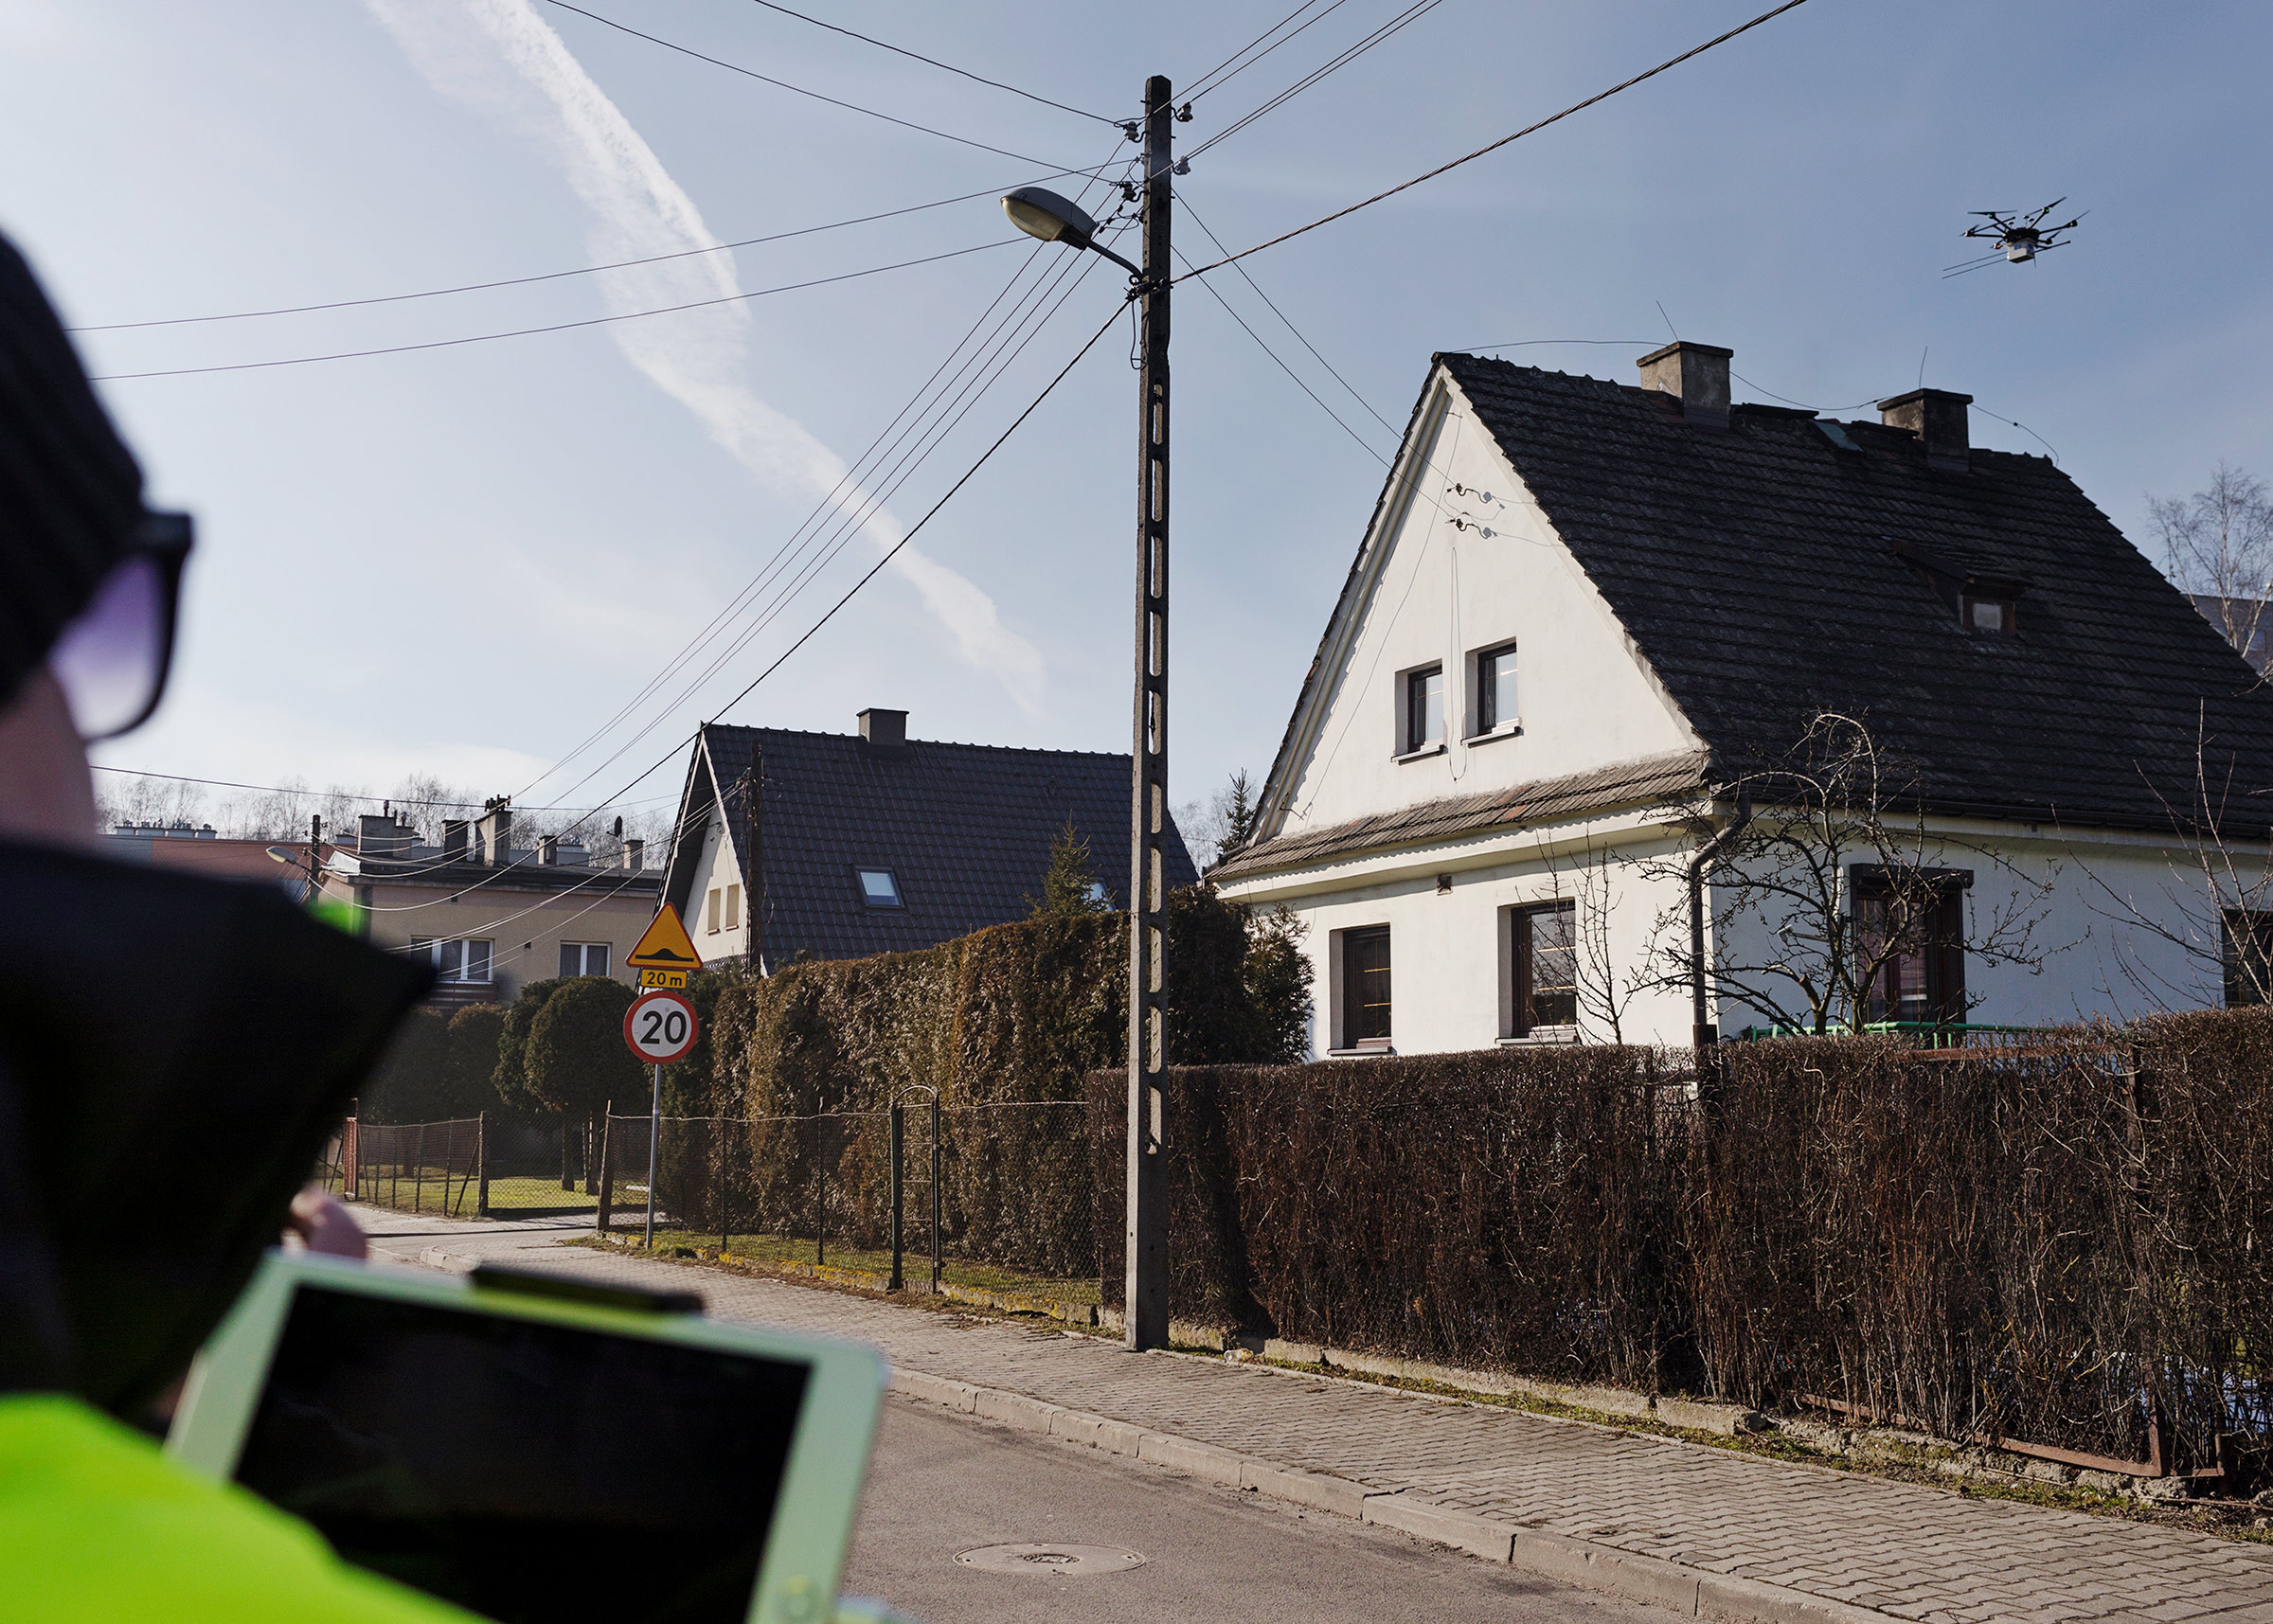 Police in Katowice, one of the most polluted cities in Europe, use drone technology to test smoke coming out of chimneys in 2018. (Maciek Nabrdalik—VII/Redu​x)